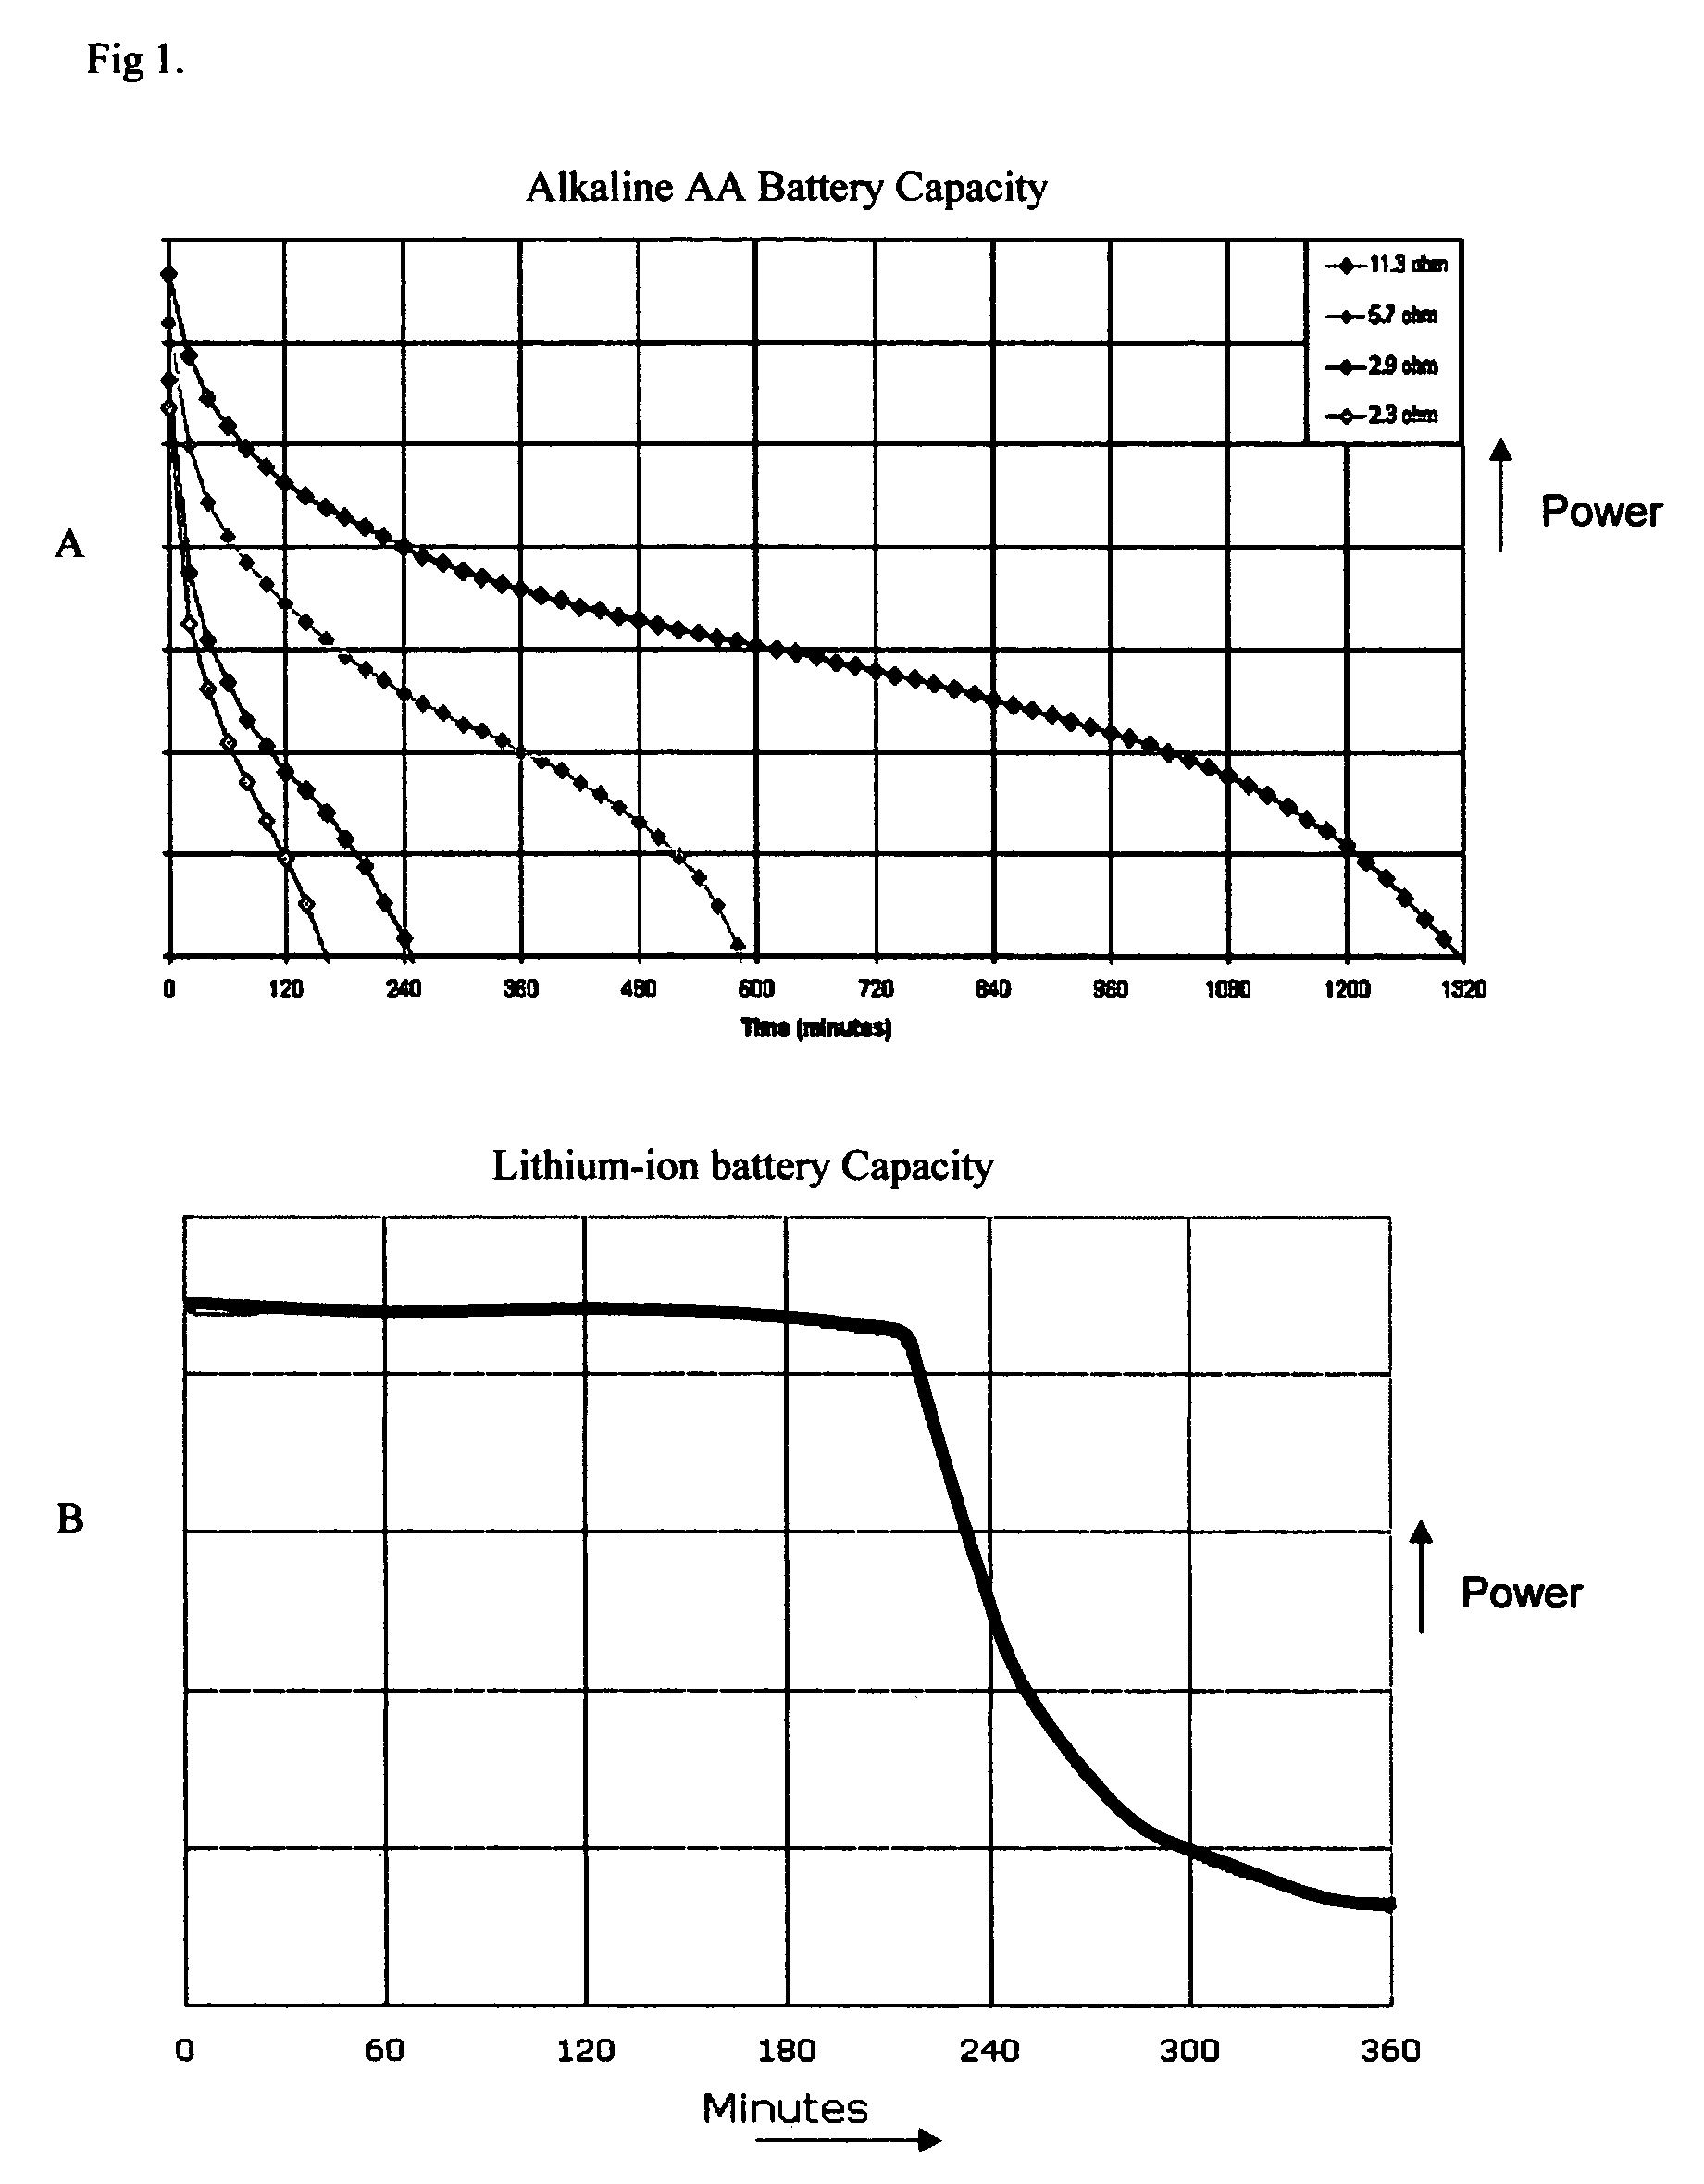 Battery operated device with a battery life indicator